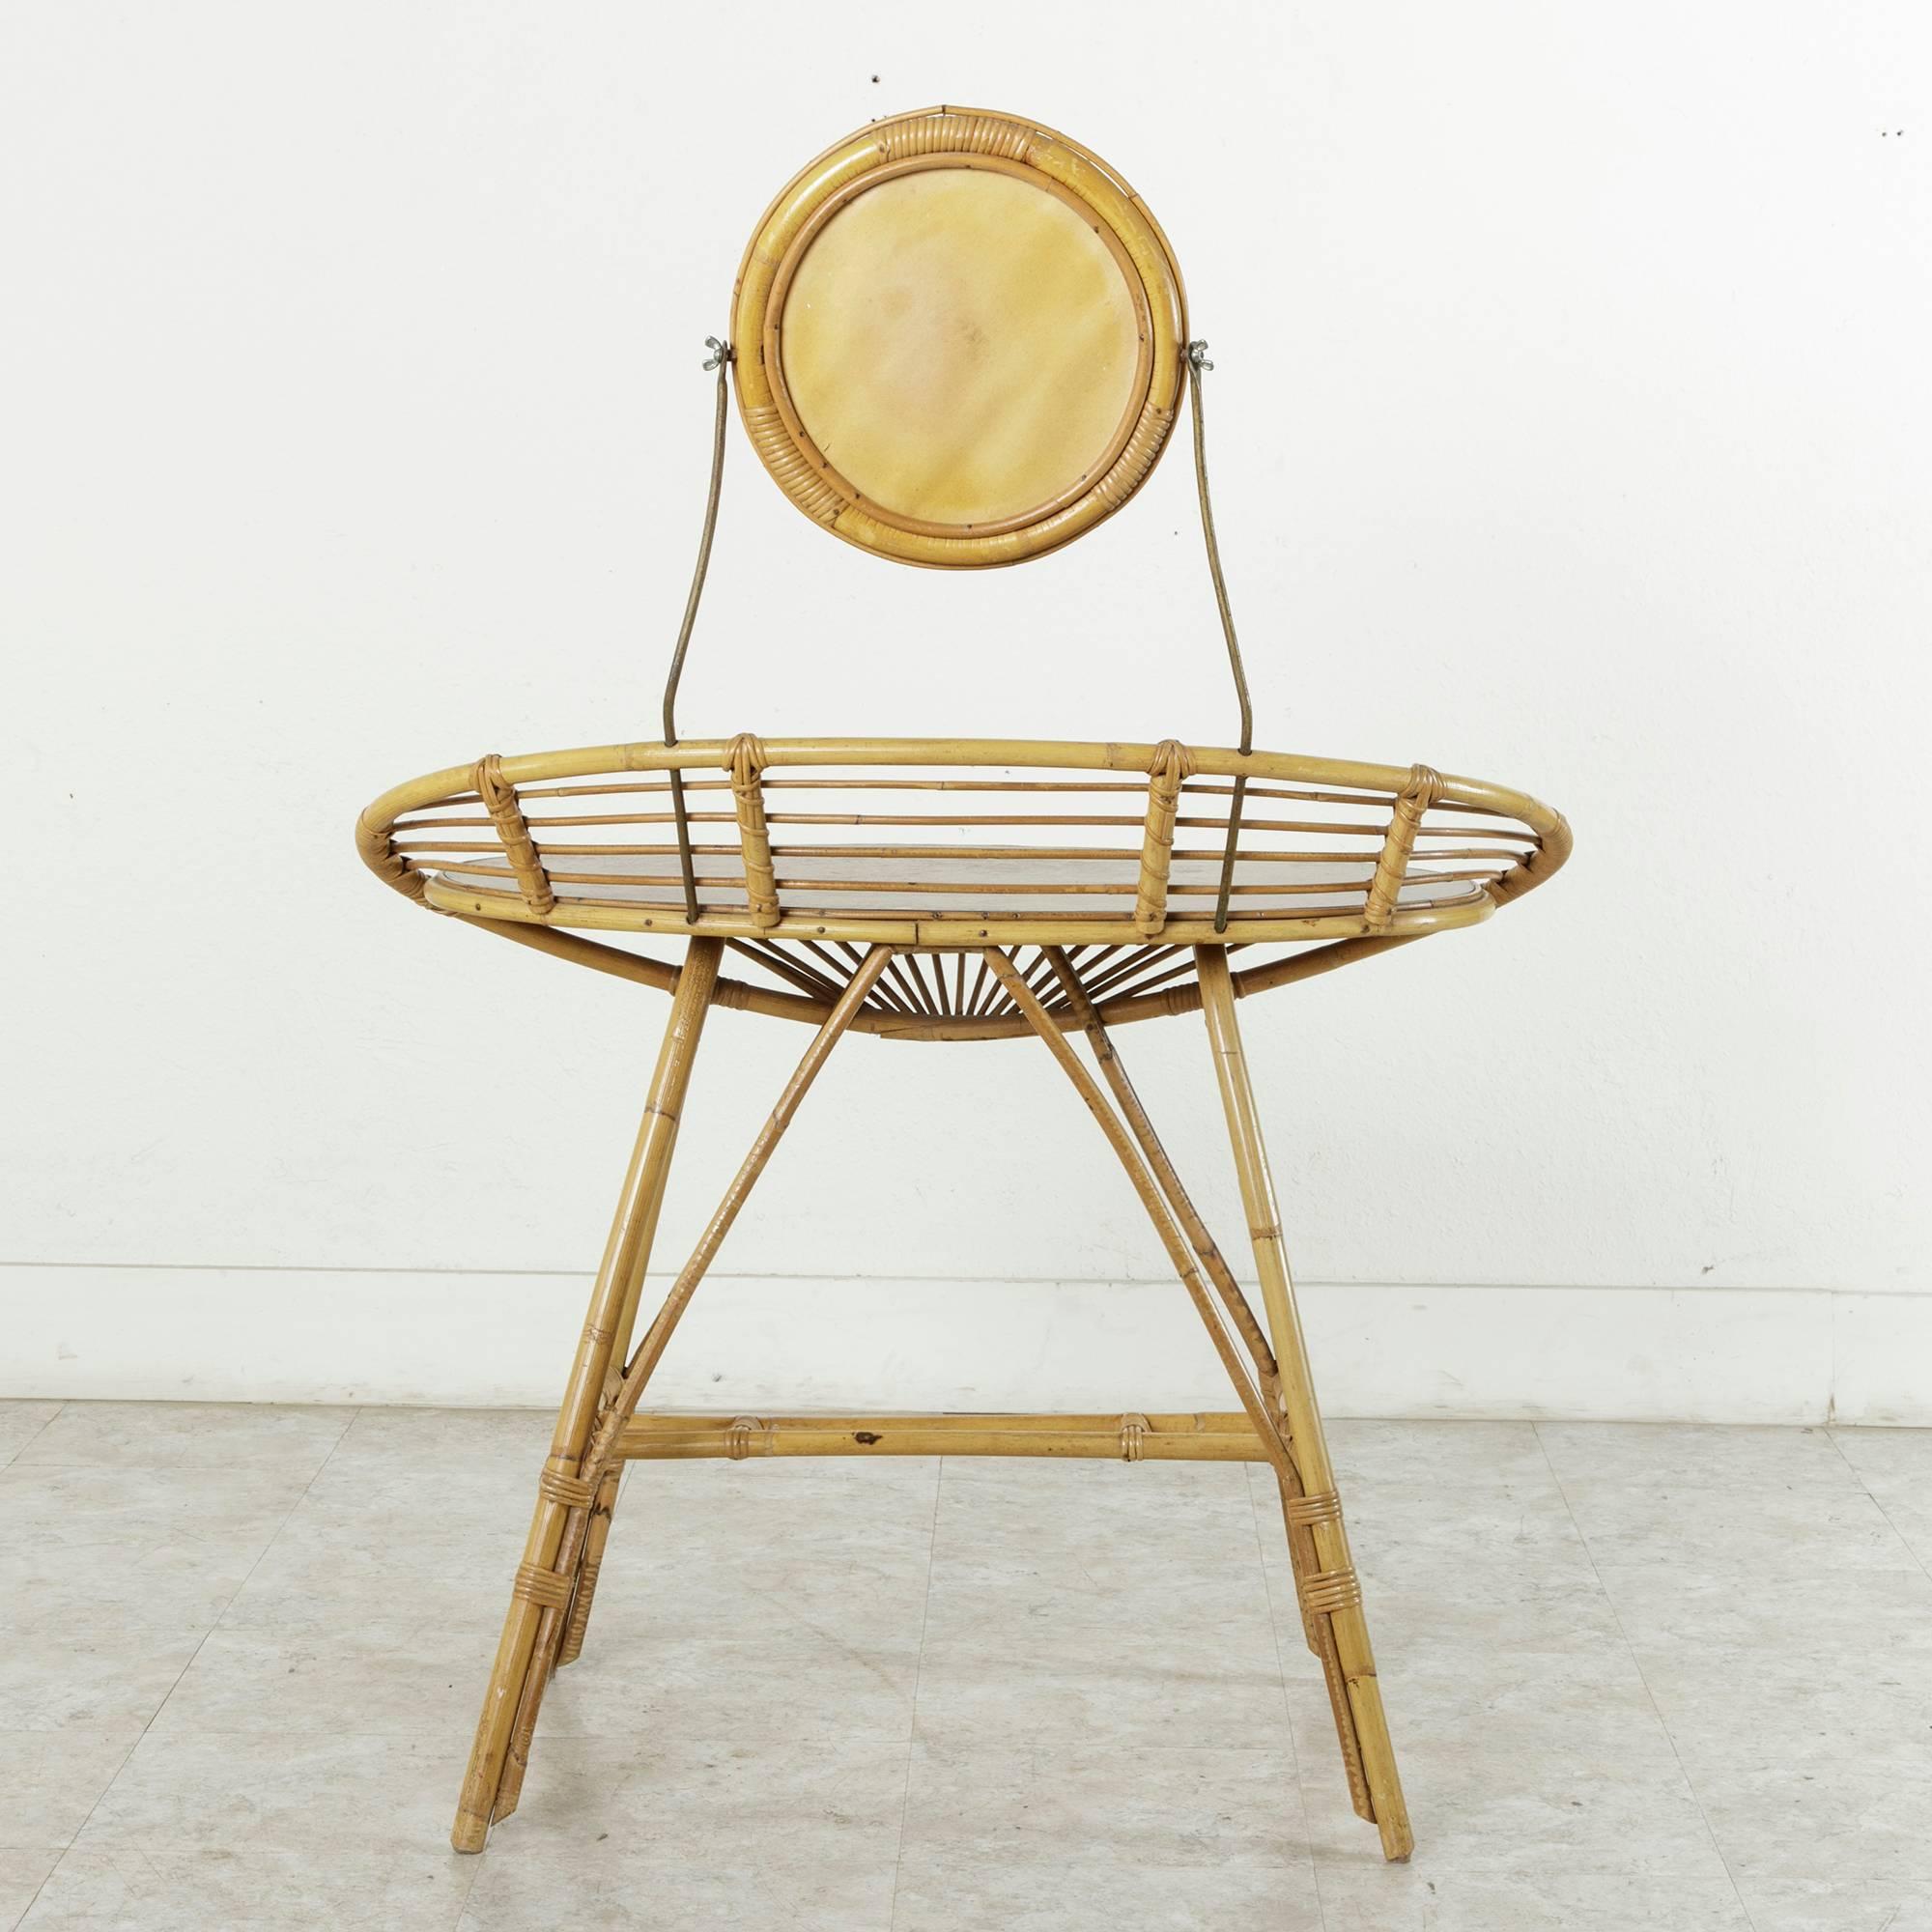 20th Century Striking Bentwood Art Deco Bamboo Table de Toilette or Vanity Table with Mirror